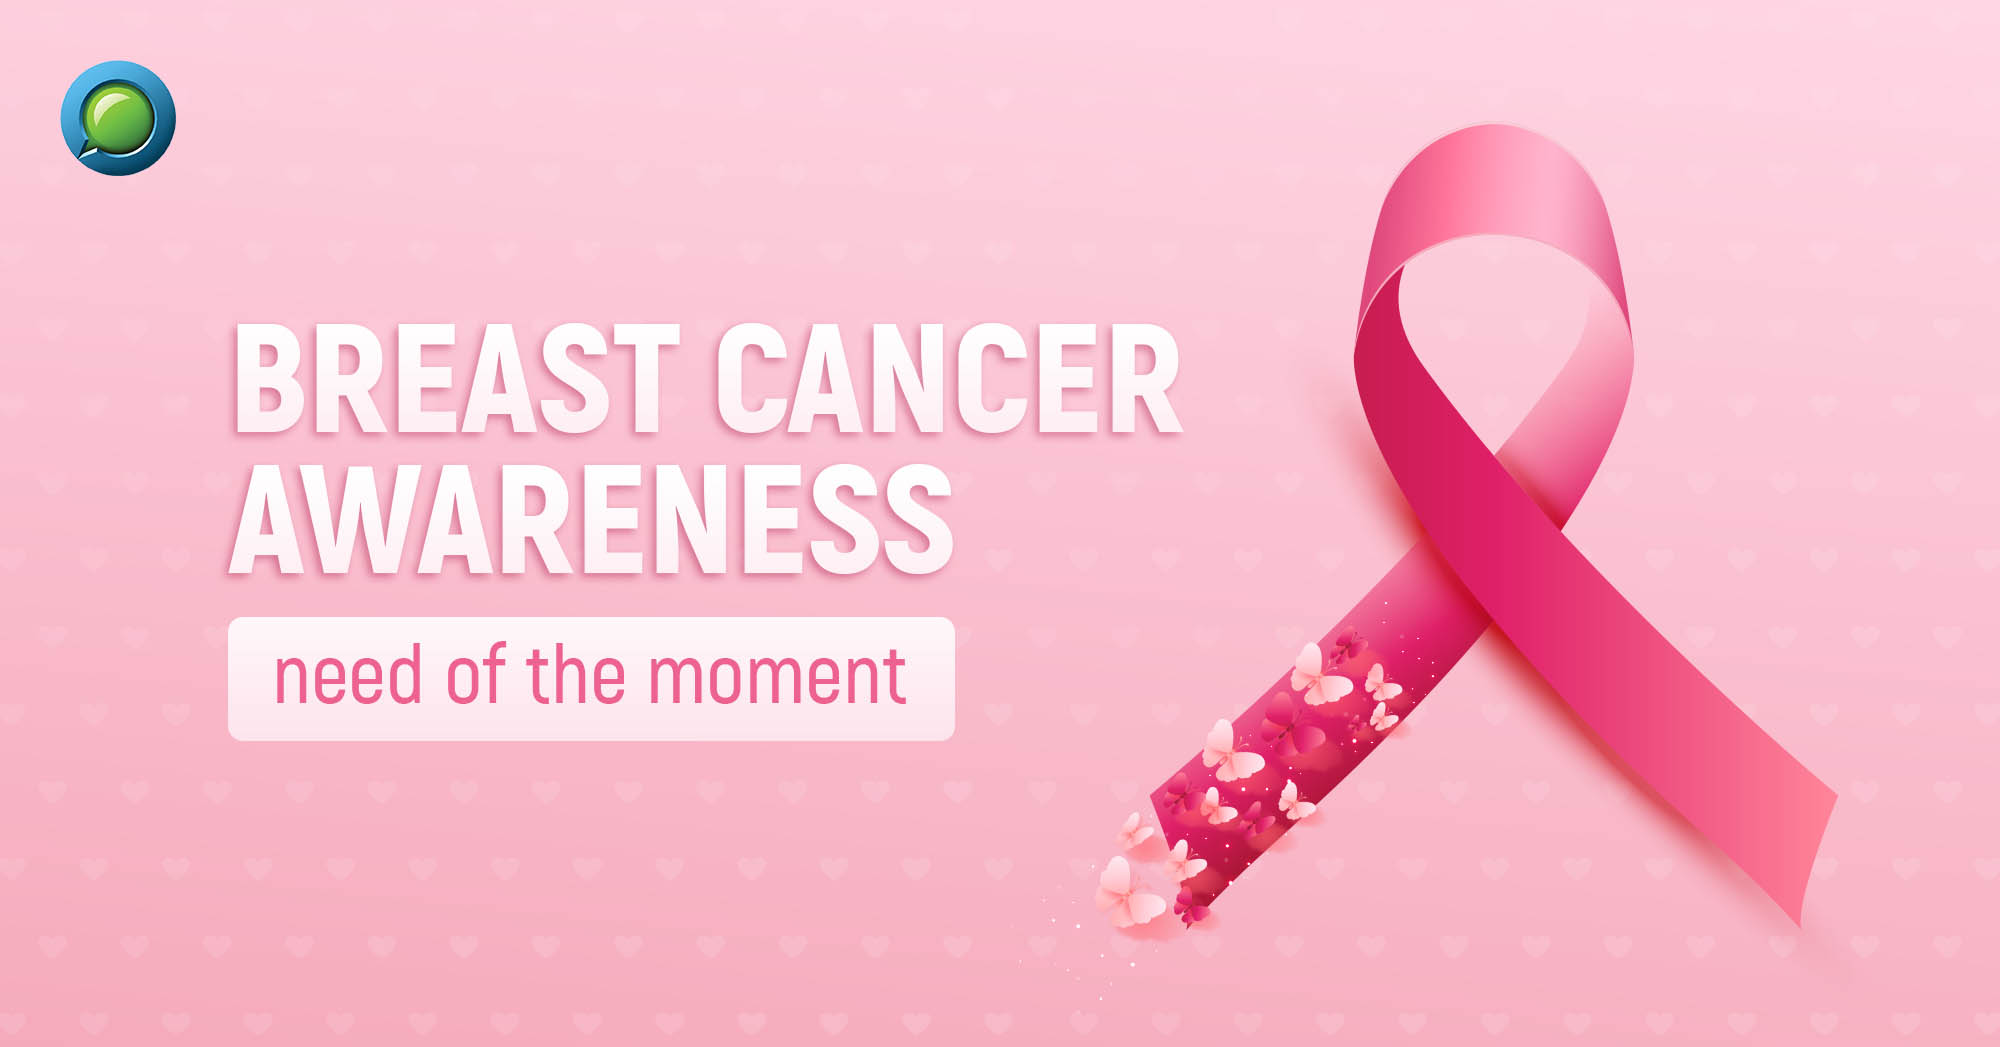 The importance of breast cancer awareness